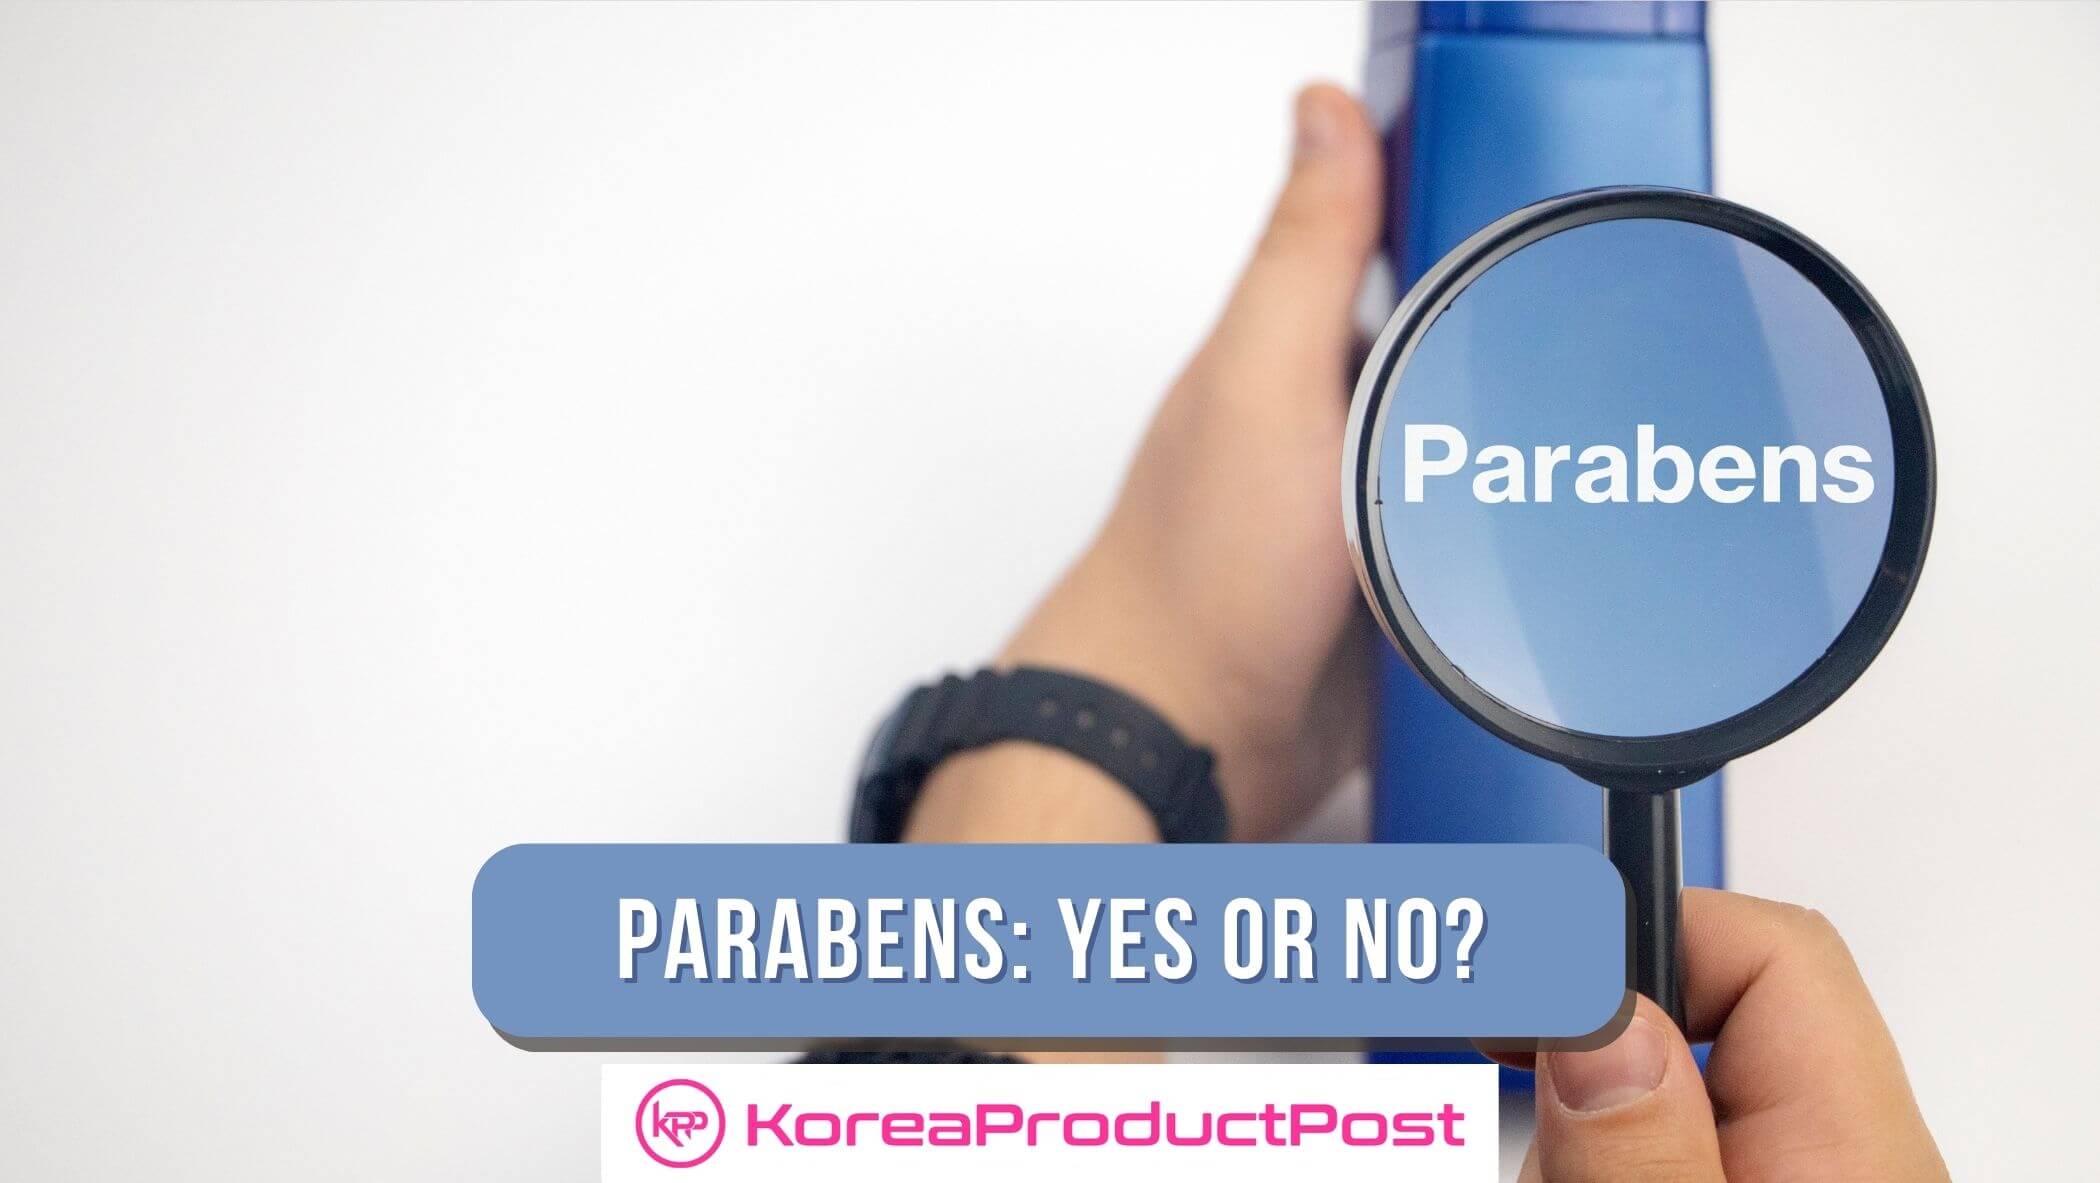 function dangers parabens in korean products